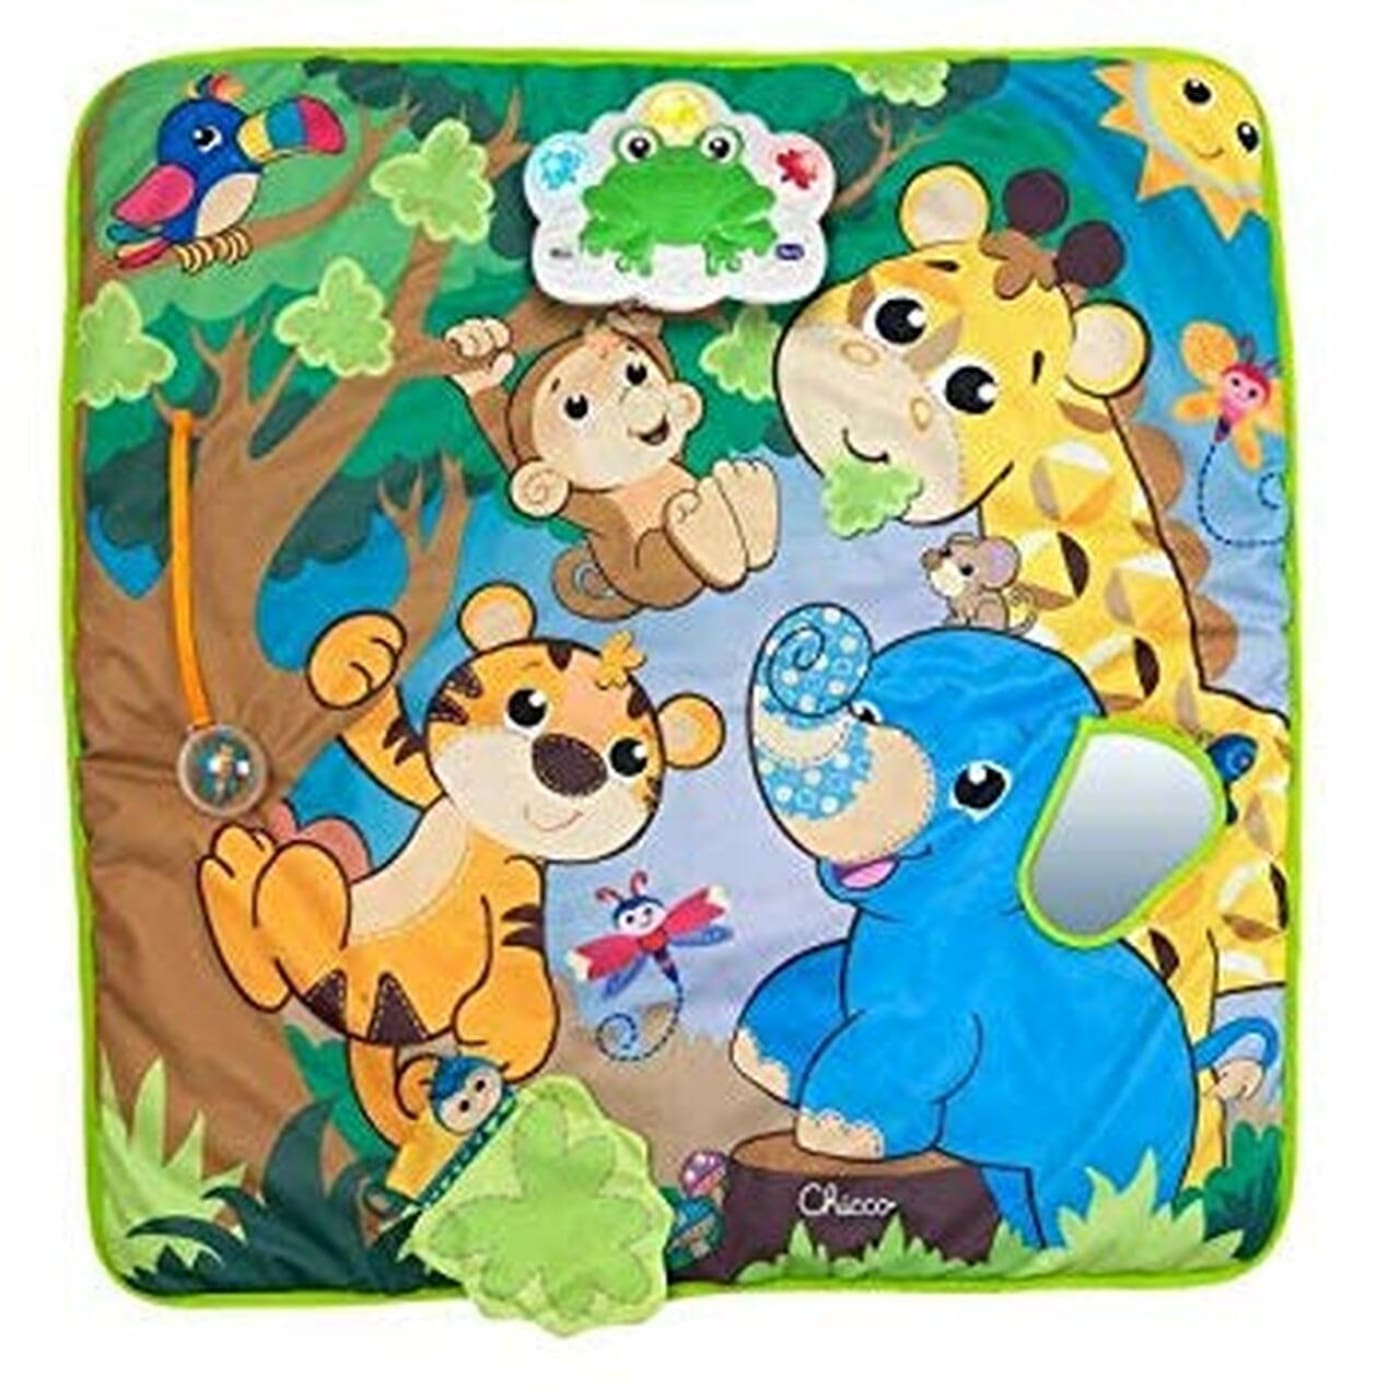 Chicco Musical Jungle Playmat - TOYS & PLAY - PLAY MATS/GYMS